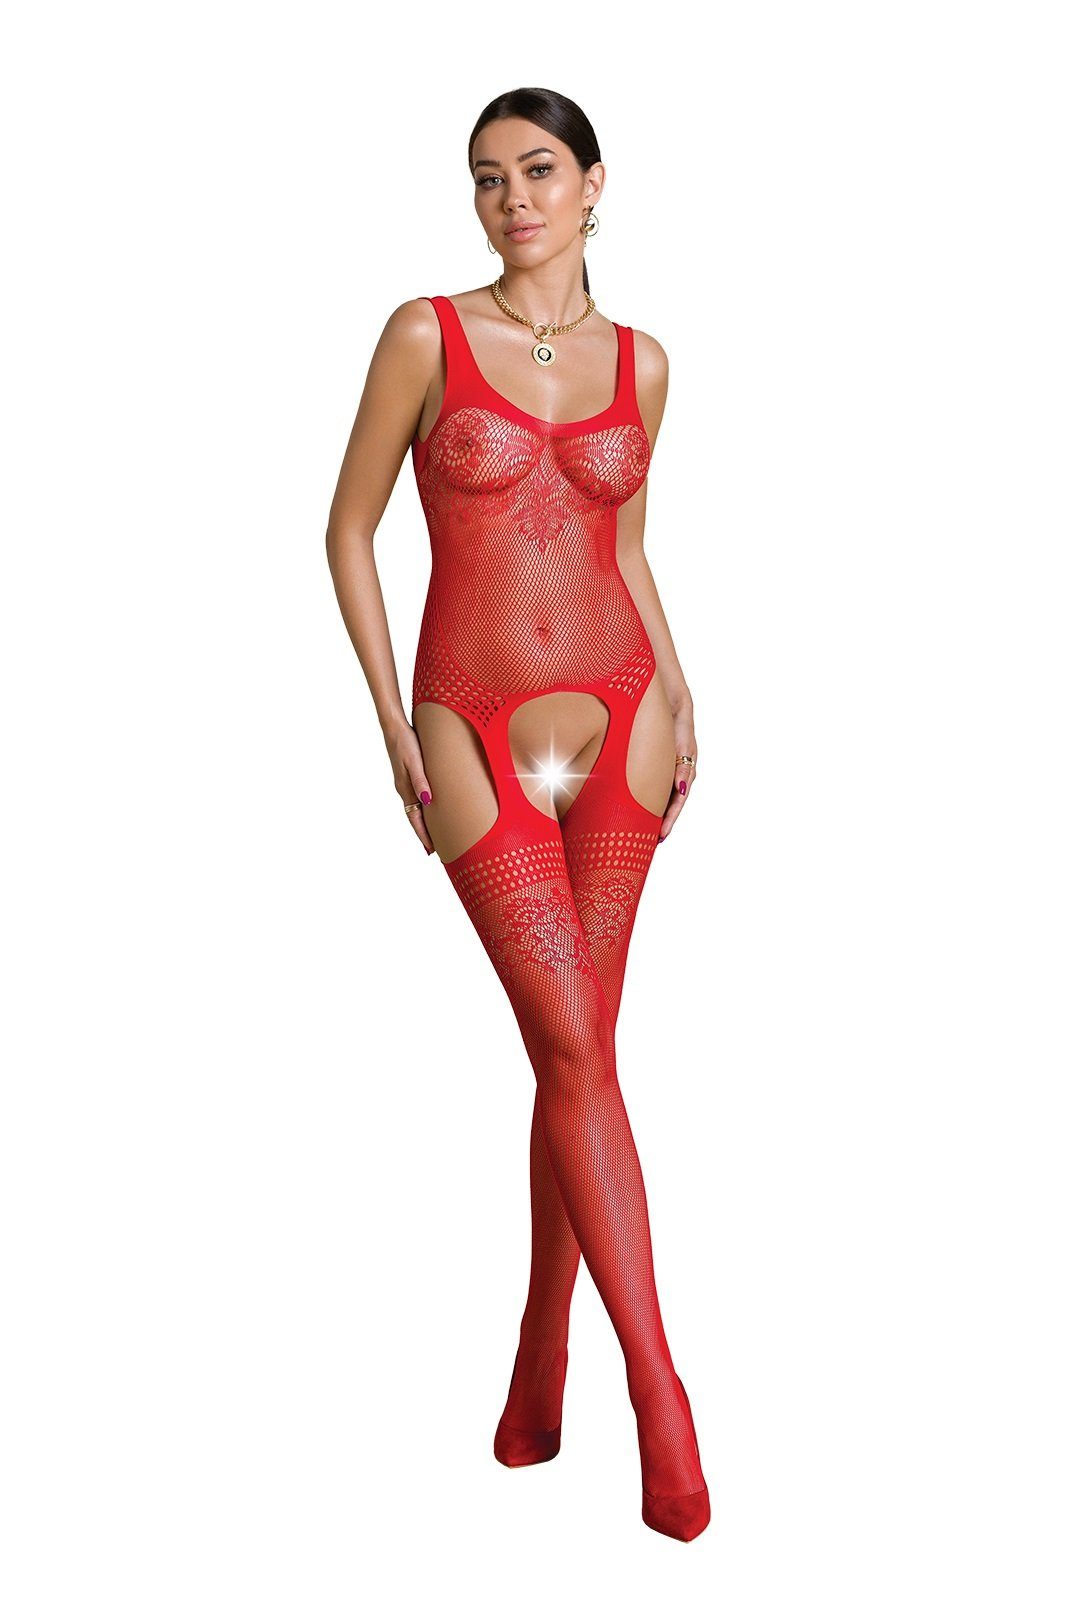 St) Eco rot Catsuit 20 Bodystocking ouvert DEN Netz Collection Passion Passion (1 Bodystocking transparent